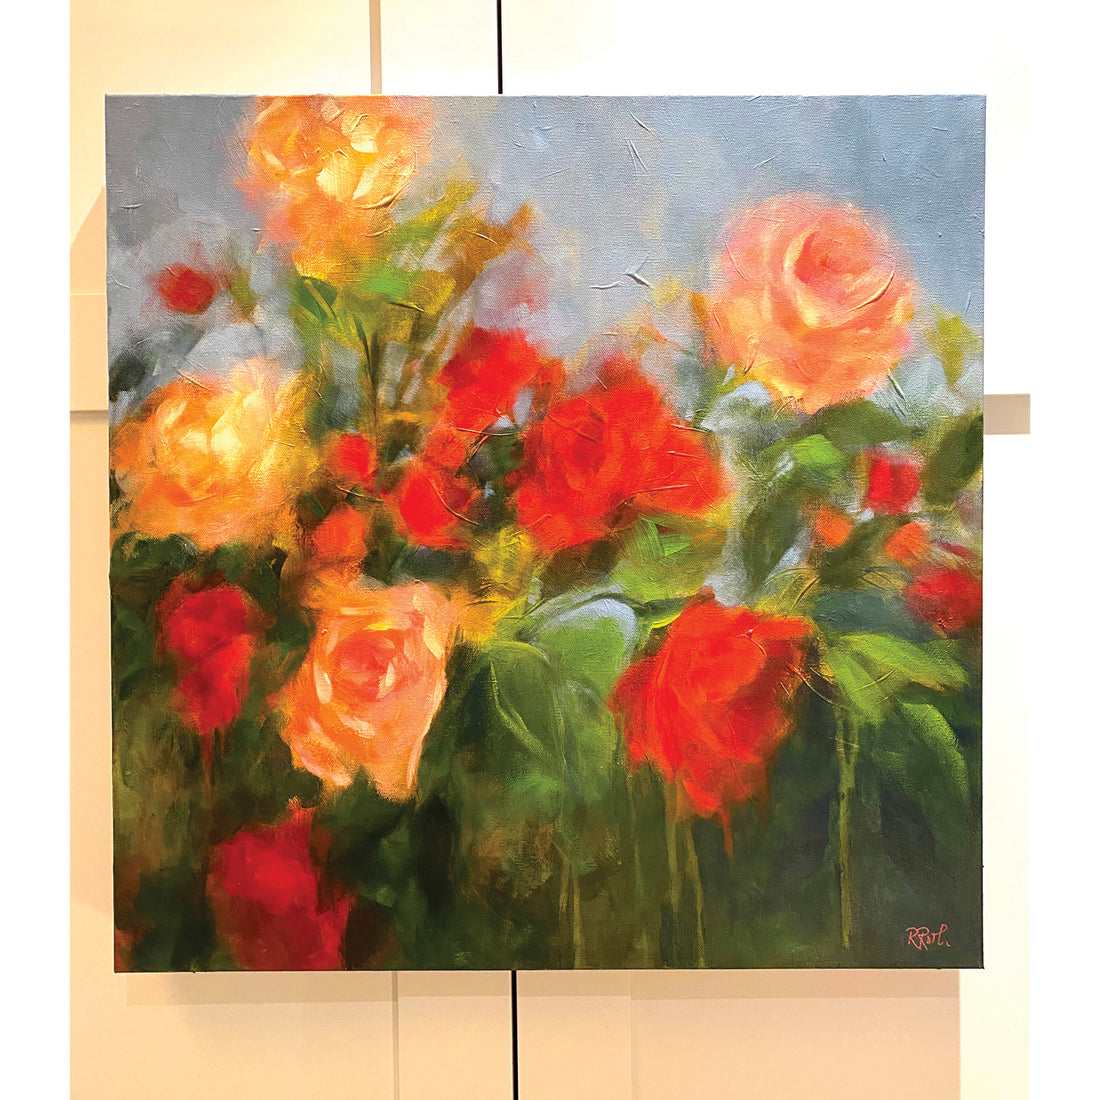 Raquel Roth "Forever Roses" floral abstract painting Canadian Art 